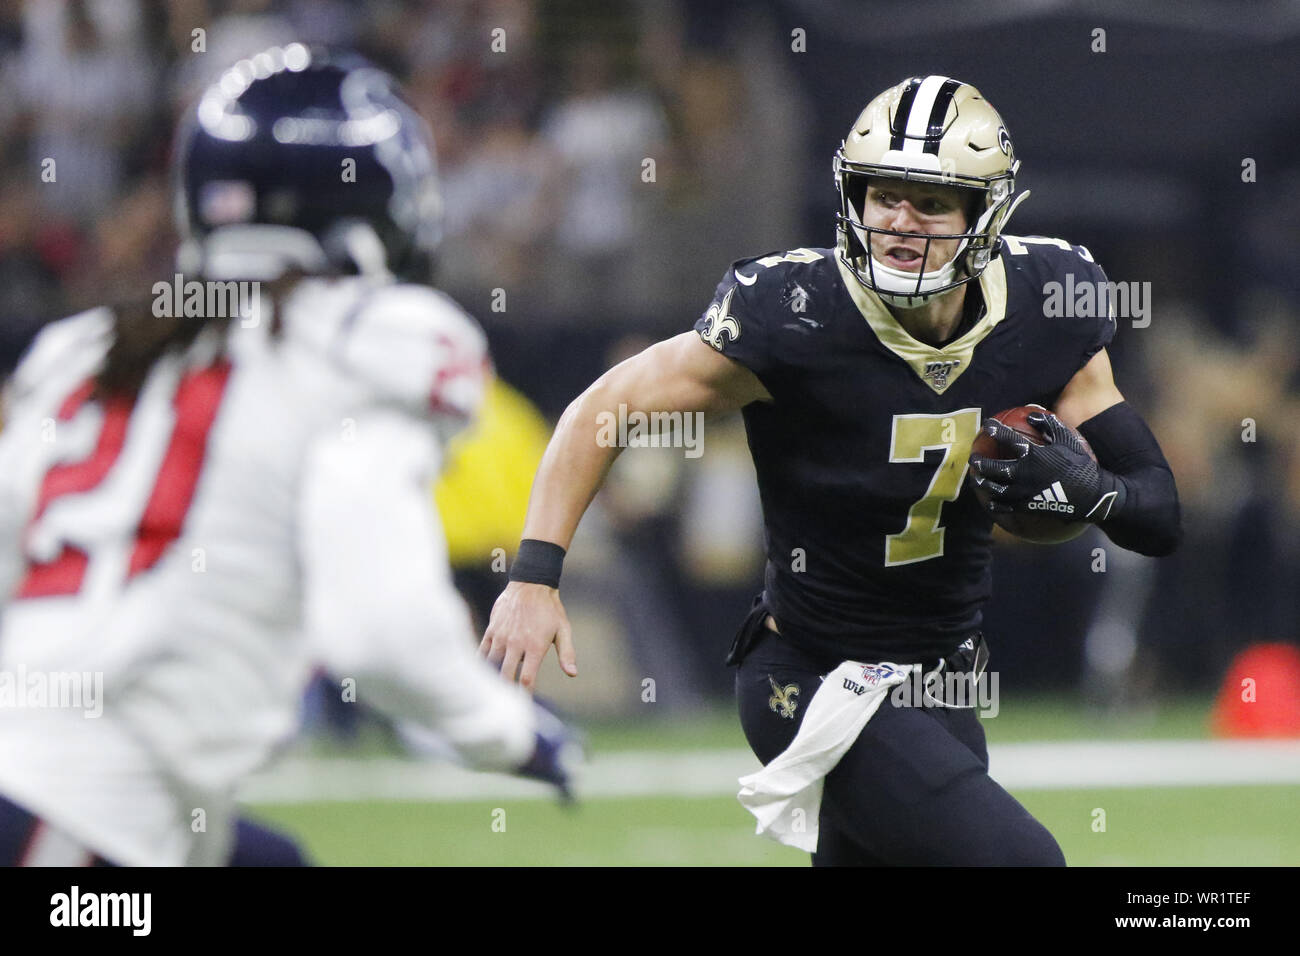 New Orleans, LOUISIANA, USA. 9th Sep, 2019. (left to right) Houston Texans cornerback Bradley Roby looks to tackles New Orleans Saints quarterback Taysom Hill in New Orleans, Louisiana USA on September 9, 2019. The Saints beat the Texans 30-28. Credit: Dan Anderson/ZUMA Wire/Alamy Live News Stock Photo